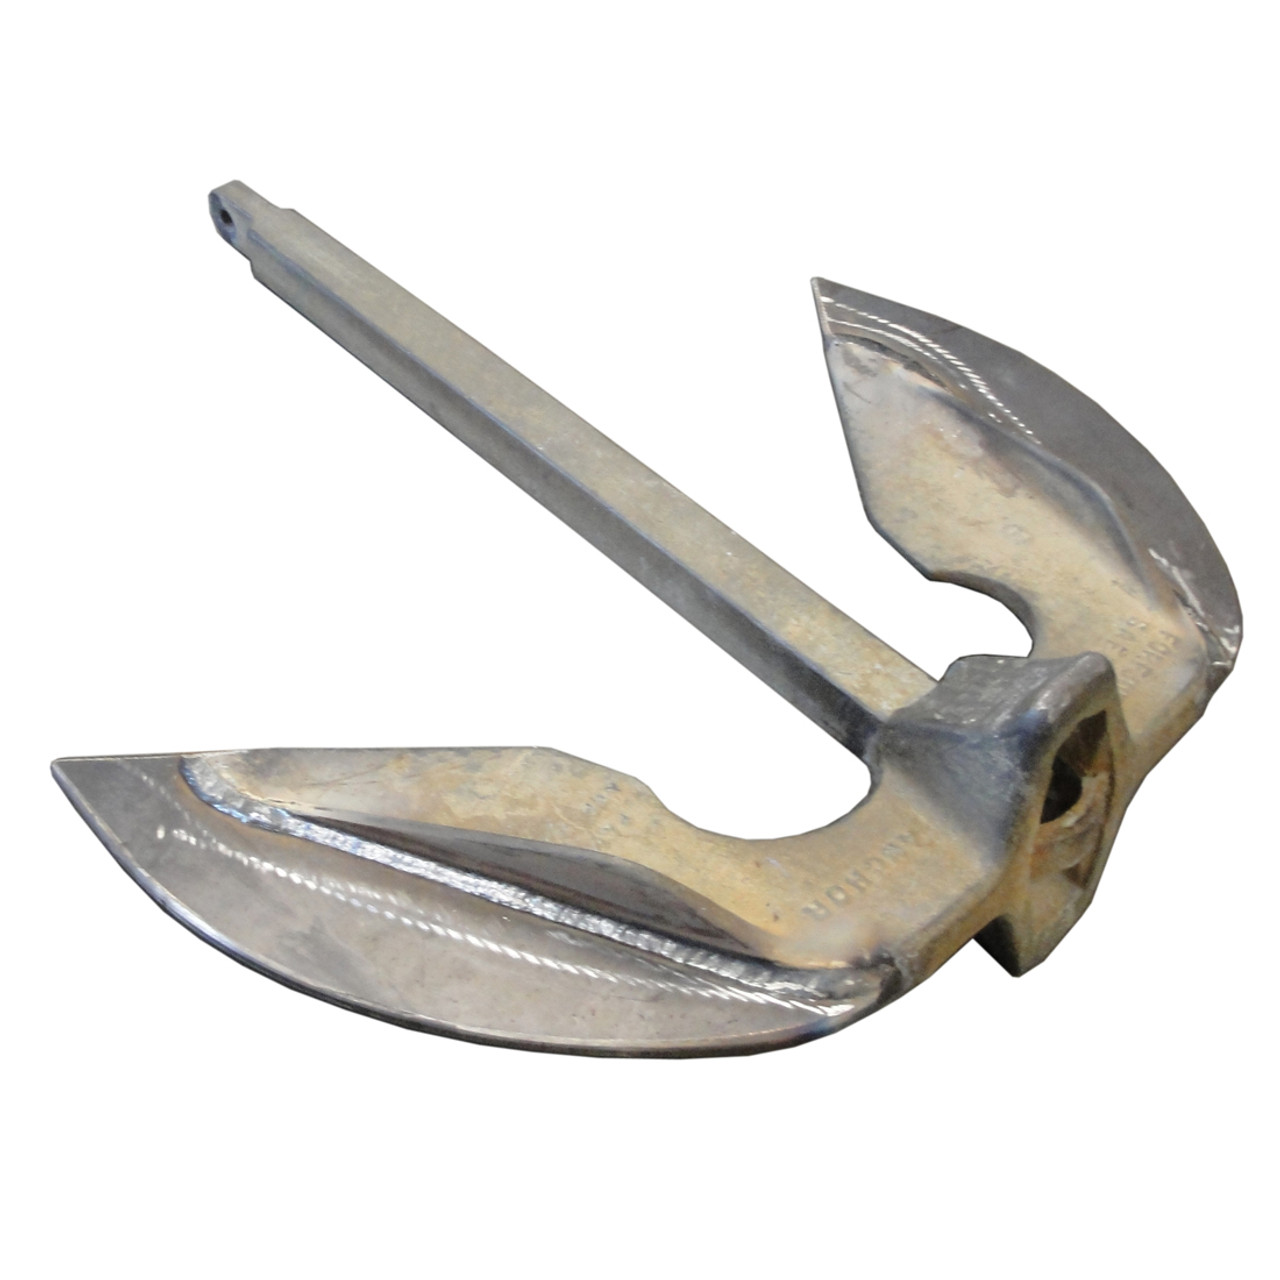 Kolstrand 'Mud Flaps' Added to Your Forfjord #8 Marine Anchor